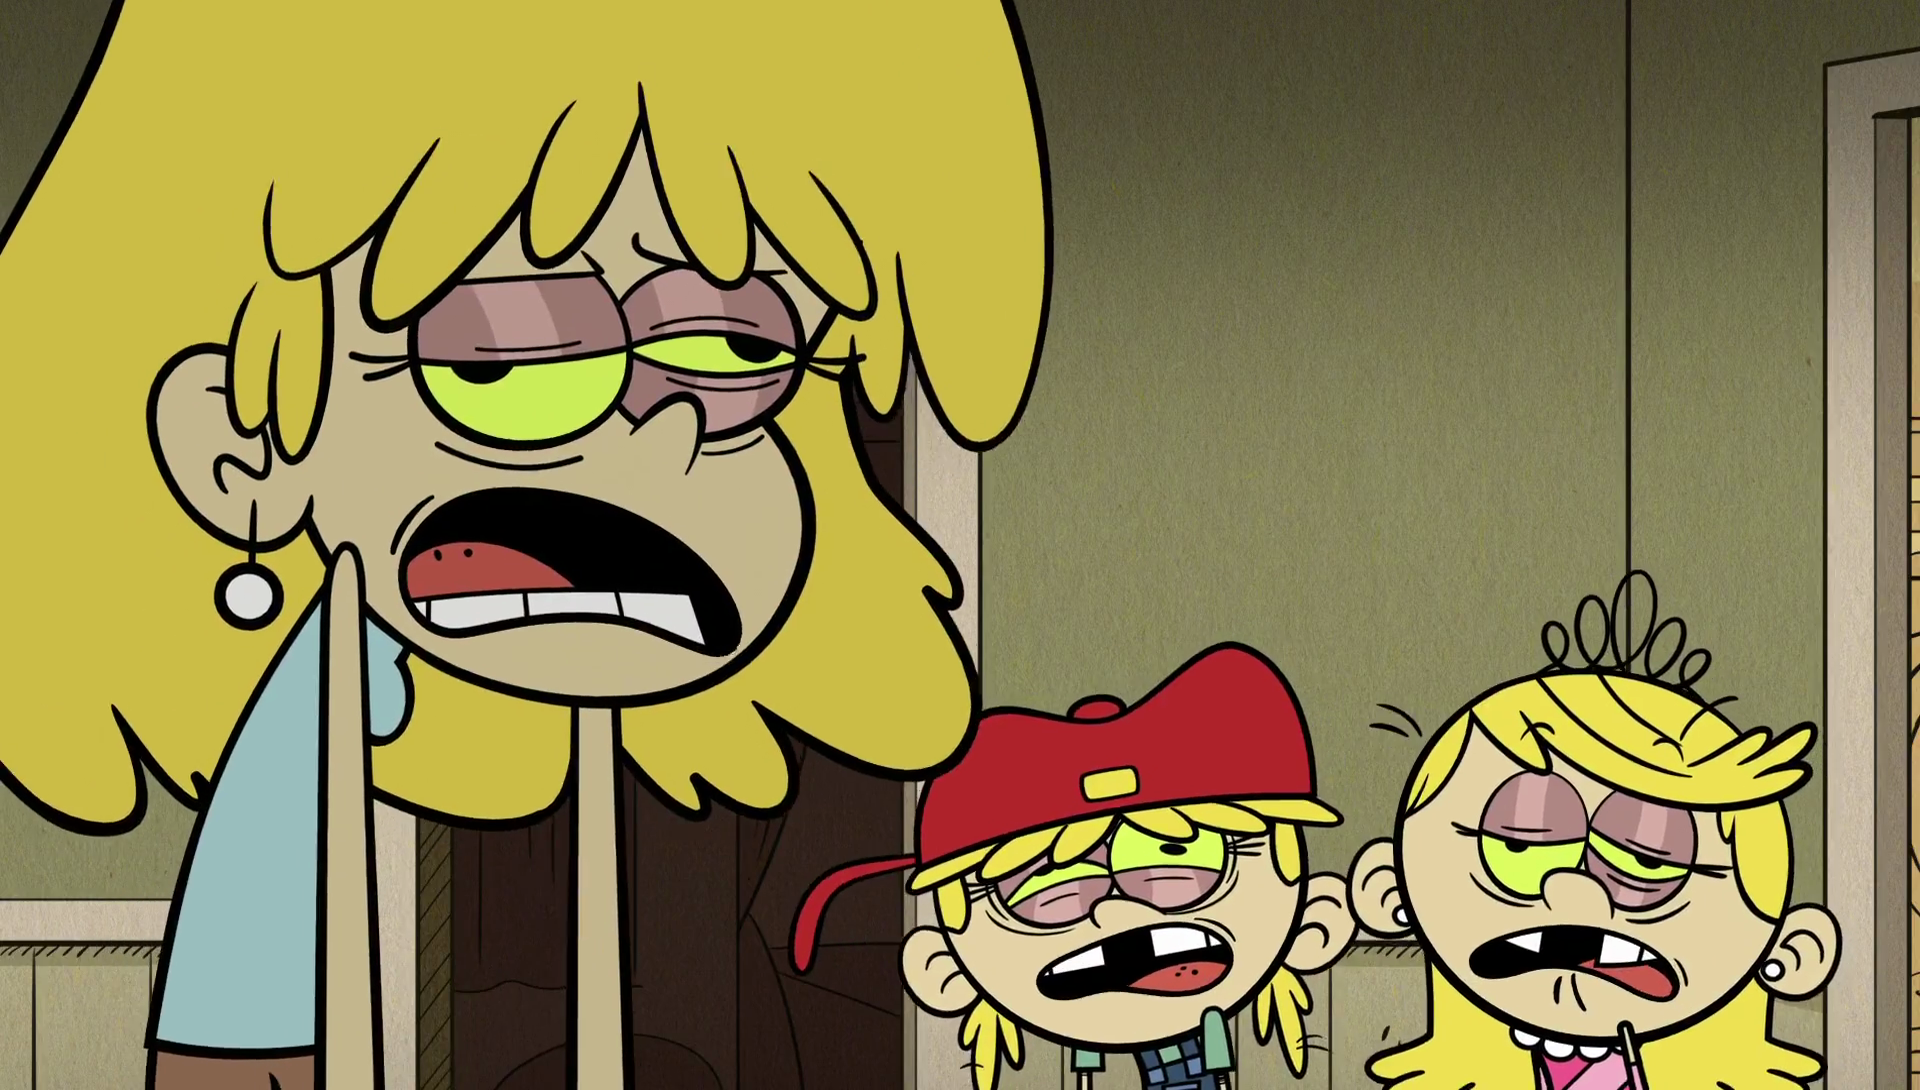 Image S1e25b Sick Lori And Twins Approach Lincolnpng The Loud House Encyclopedia Fandom 3897